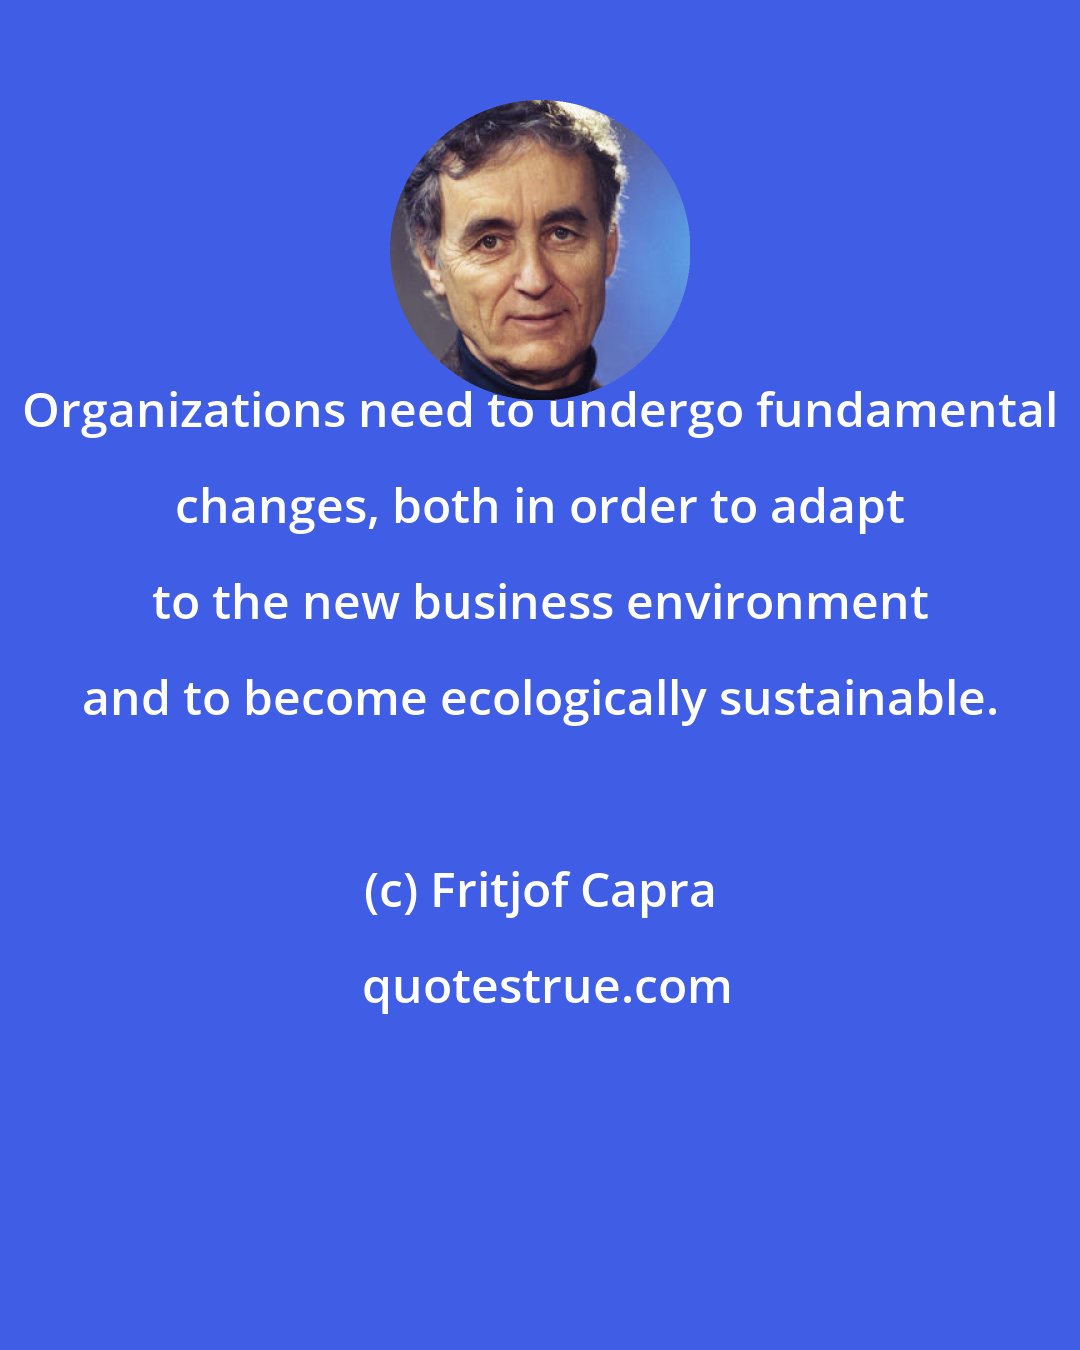 Fritjof Capra: Organizations need to undergo fundamental changes, both in order to adapt to the new business environment and to become ecologically sustainable.